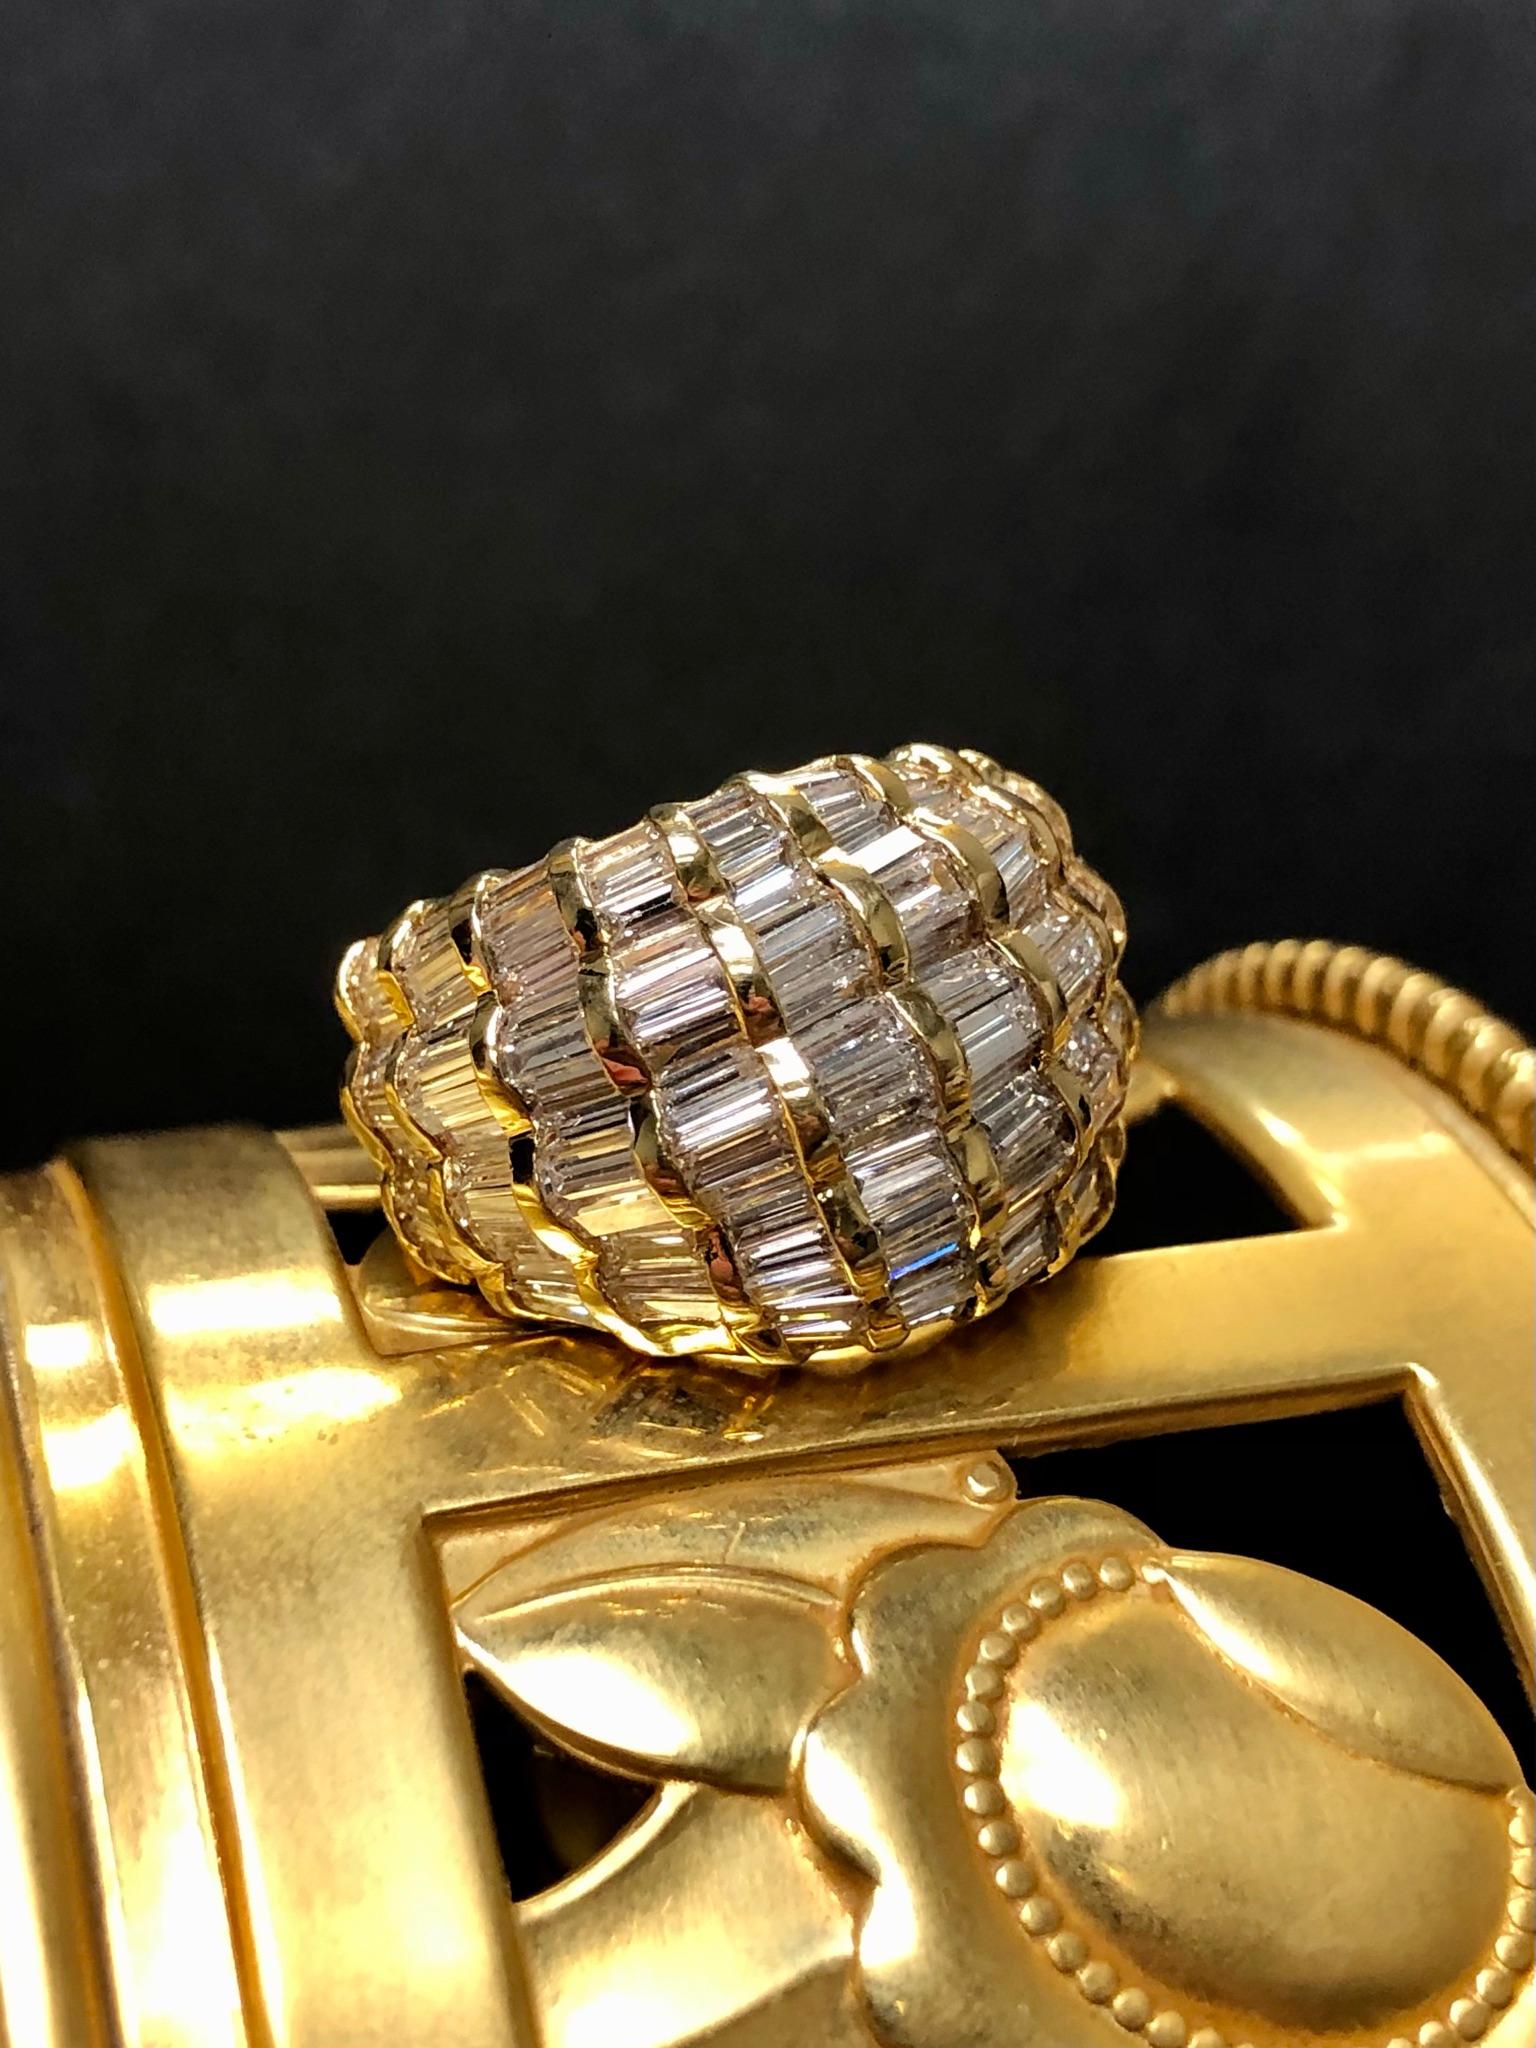 
A beautiful cocktail ring done in 18K yellow gold set with approximately 6cttw in tapered and straight baguette cut diamonds. All stones average G-I in color and Vs1-Si1 clarity.


Dimensions/Weight:

Ring measures .60” wide and weighs 5.7dwt. Size